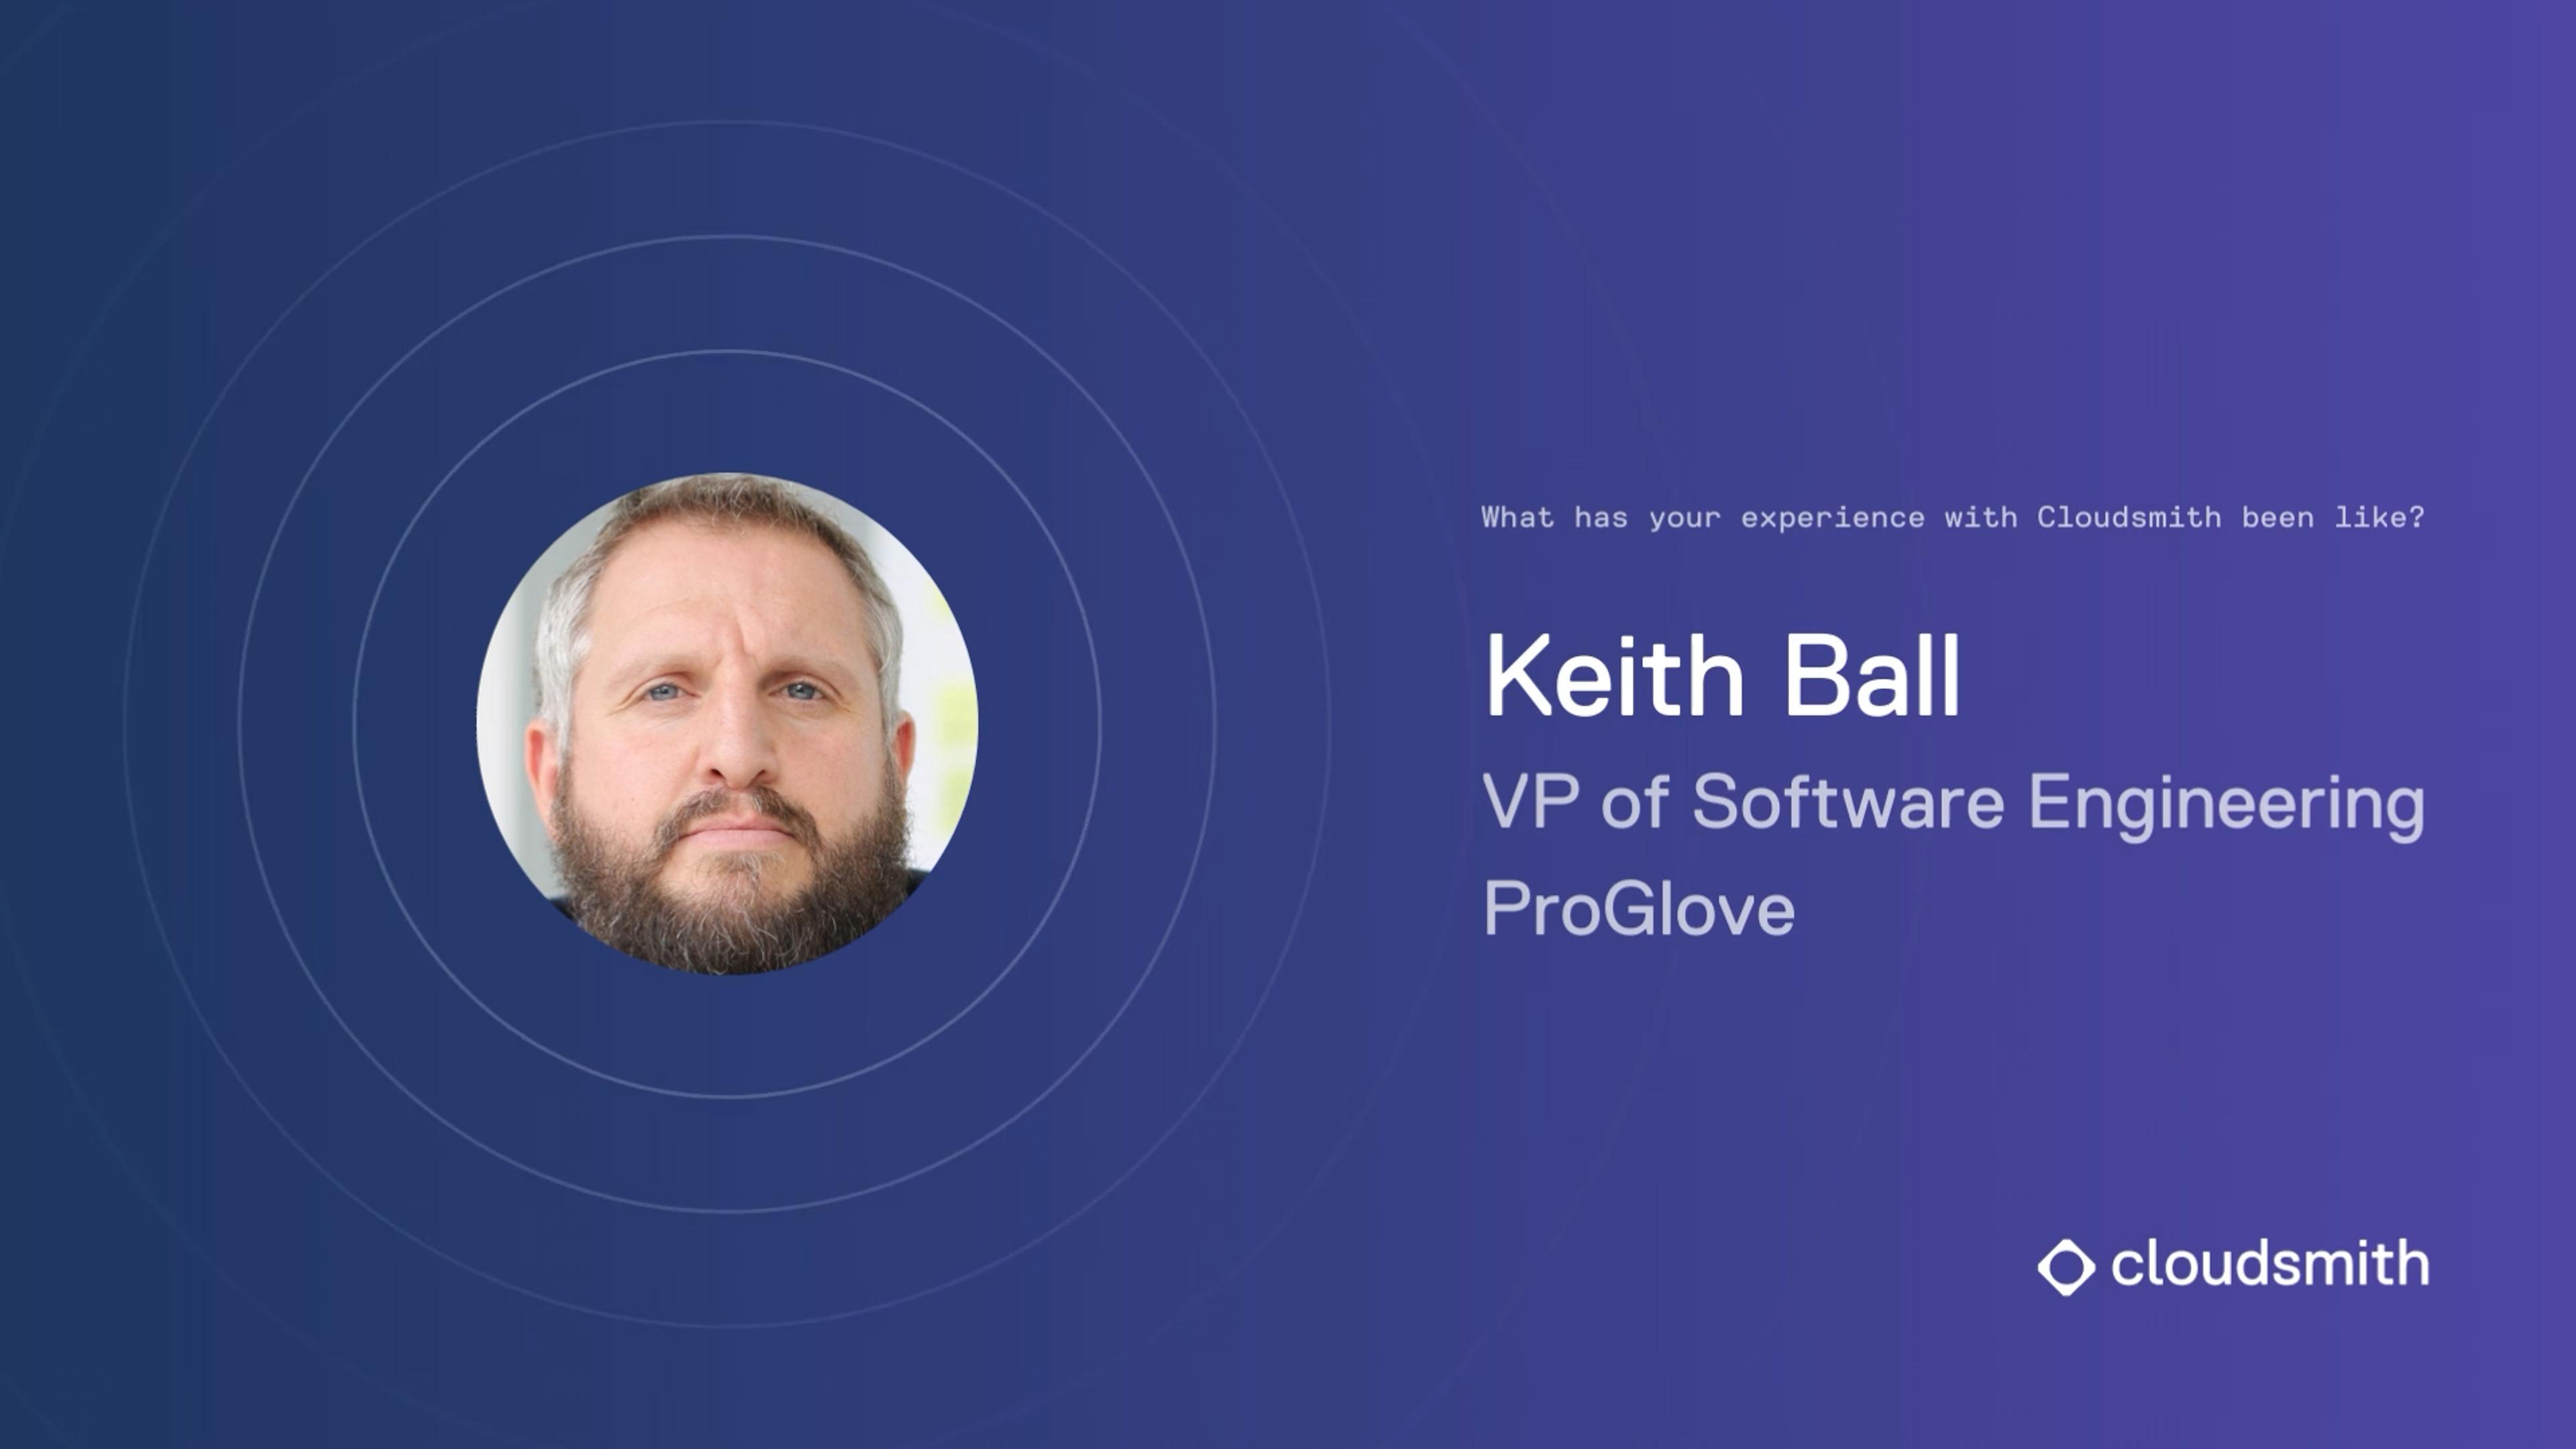 Keith Ball, VP of Software Engineering at ProGlove answers the question: What has your experience with Cloudsmith been like?